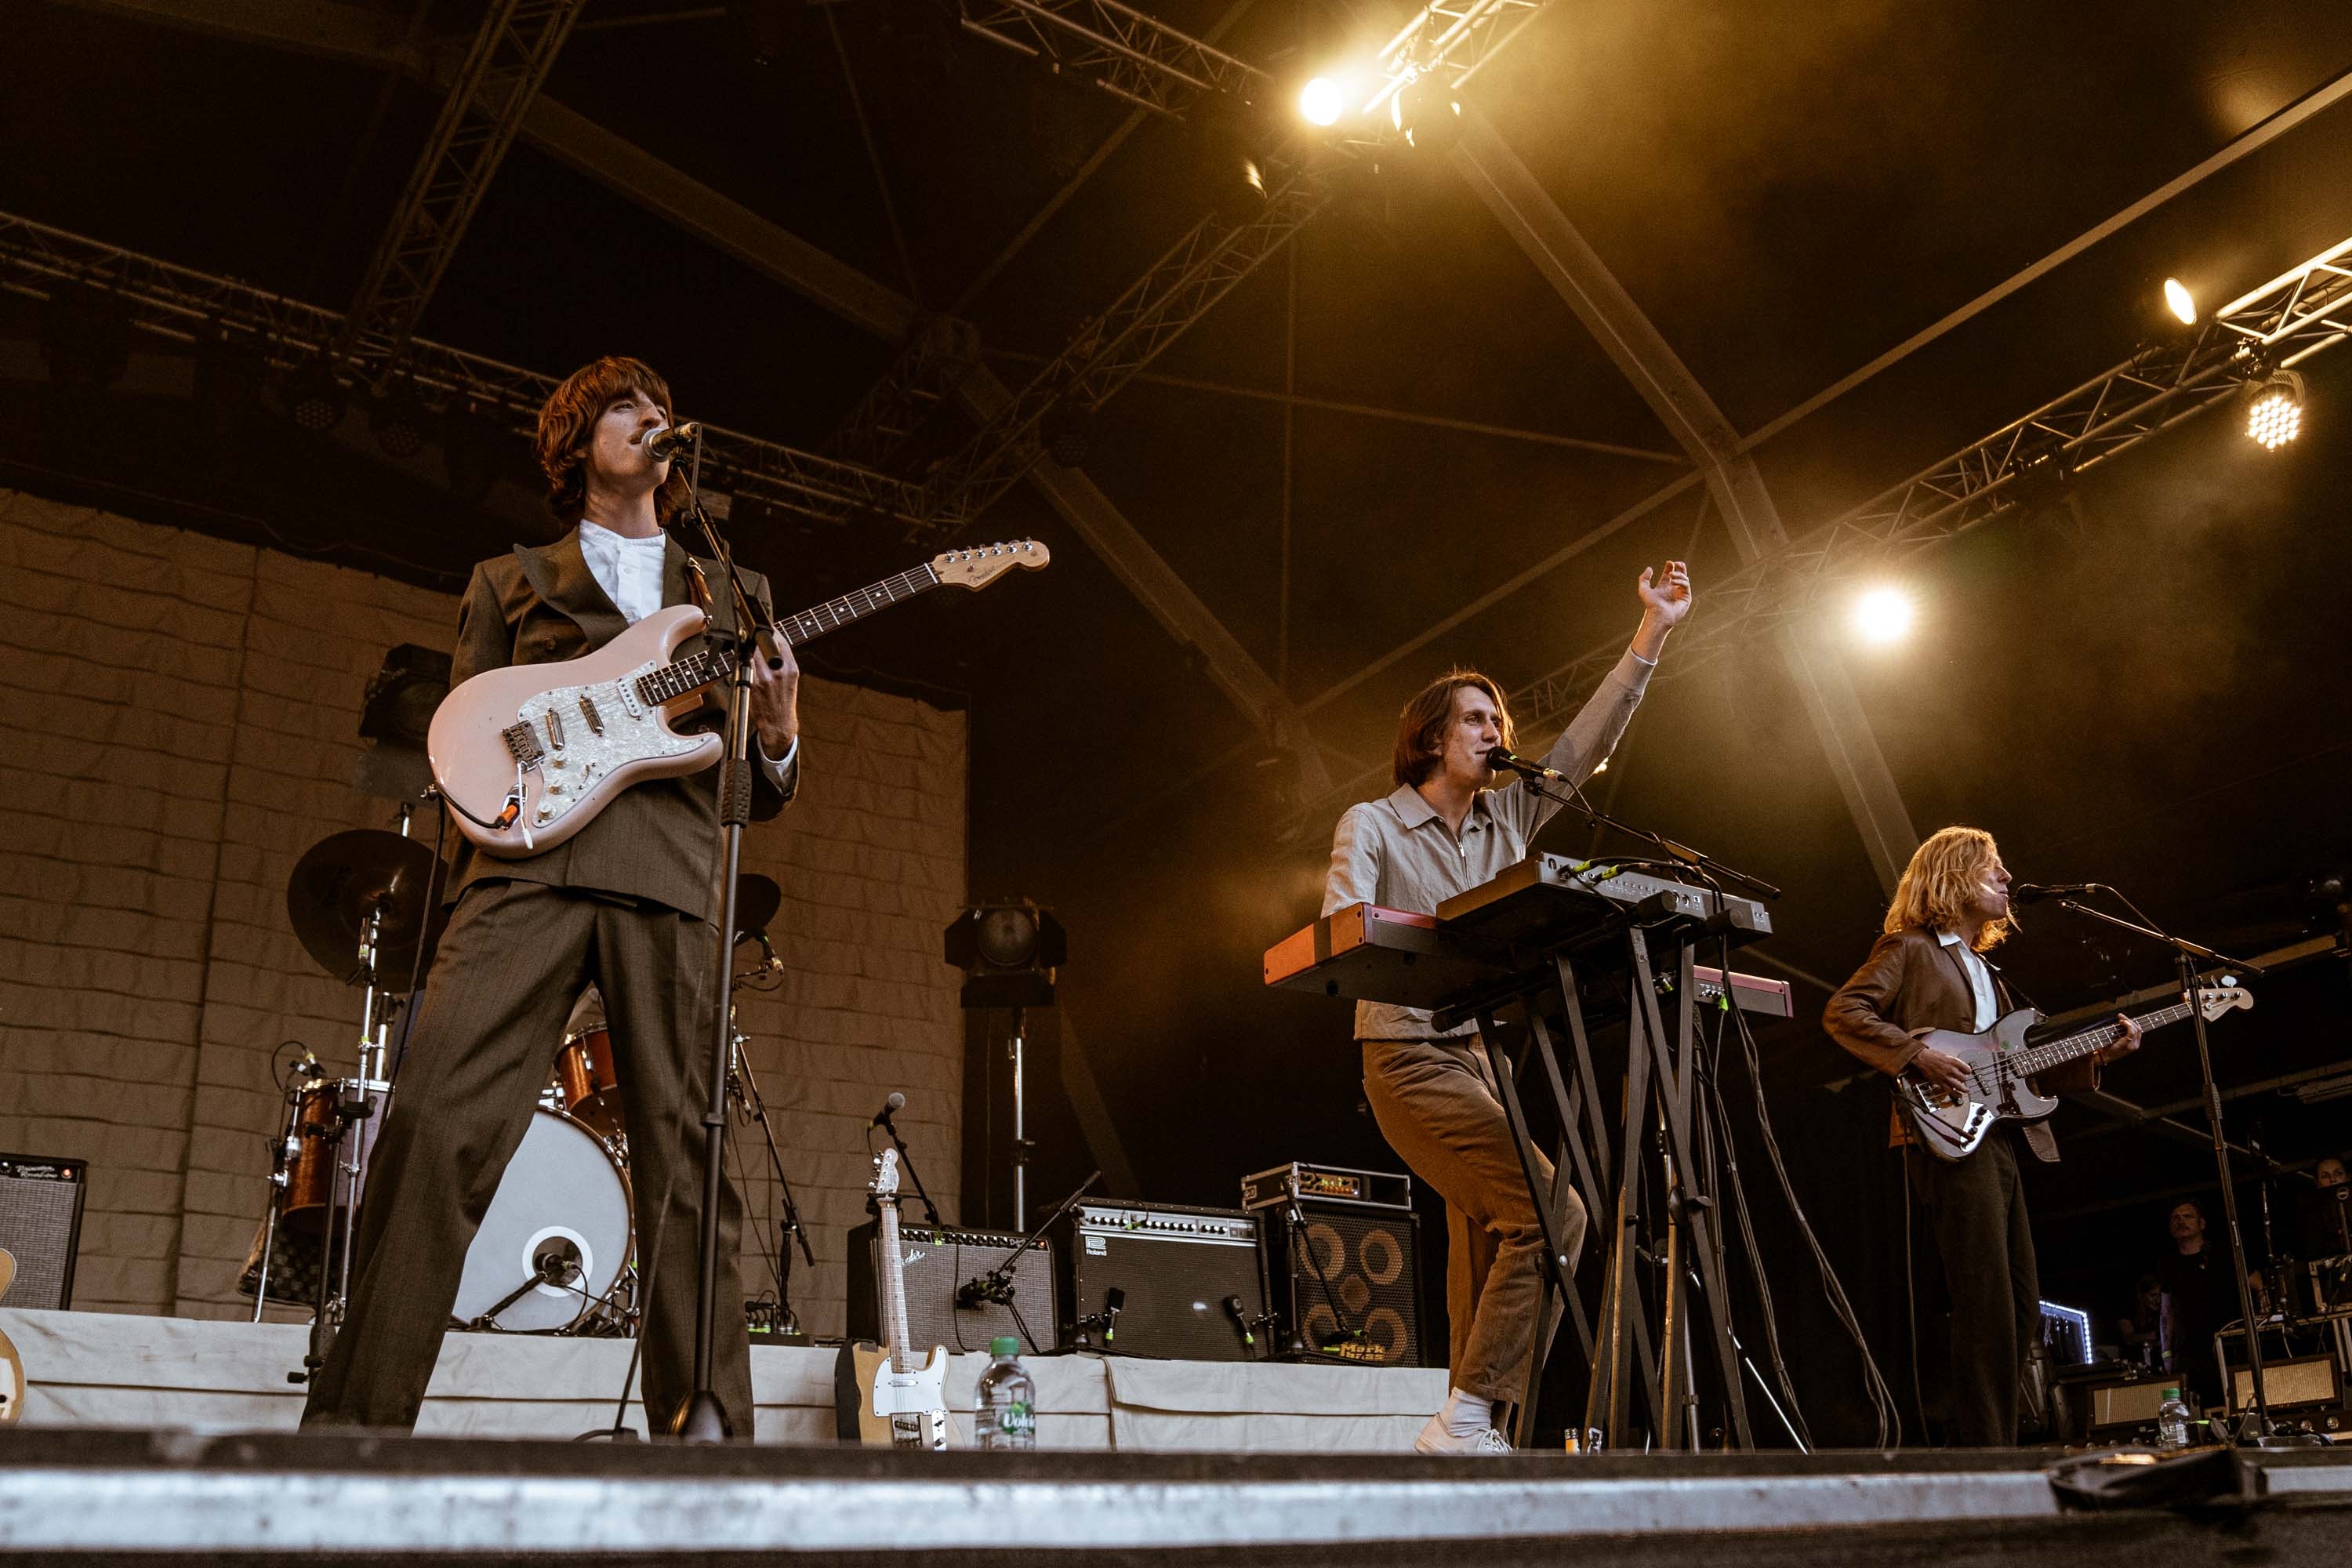 Parcels' summer show, Somerset House experience, Energetic performance, Memorable gig, 3000x2000 HD Desktop